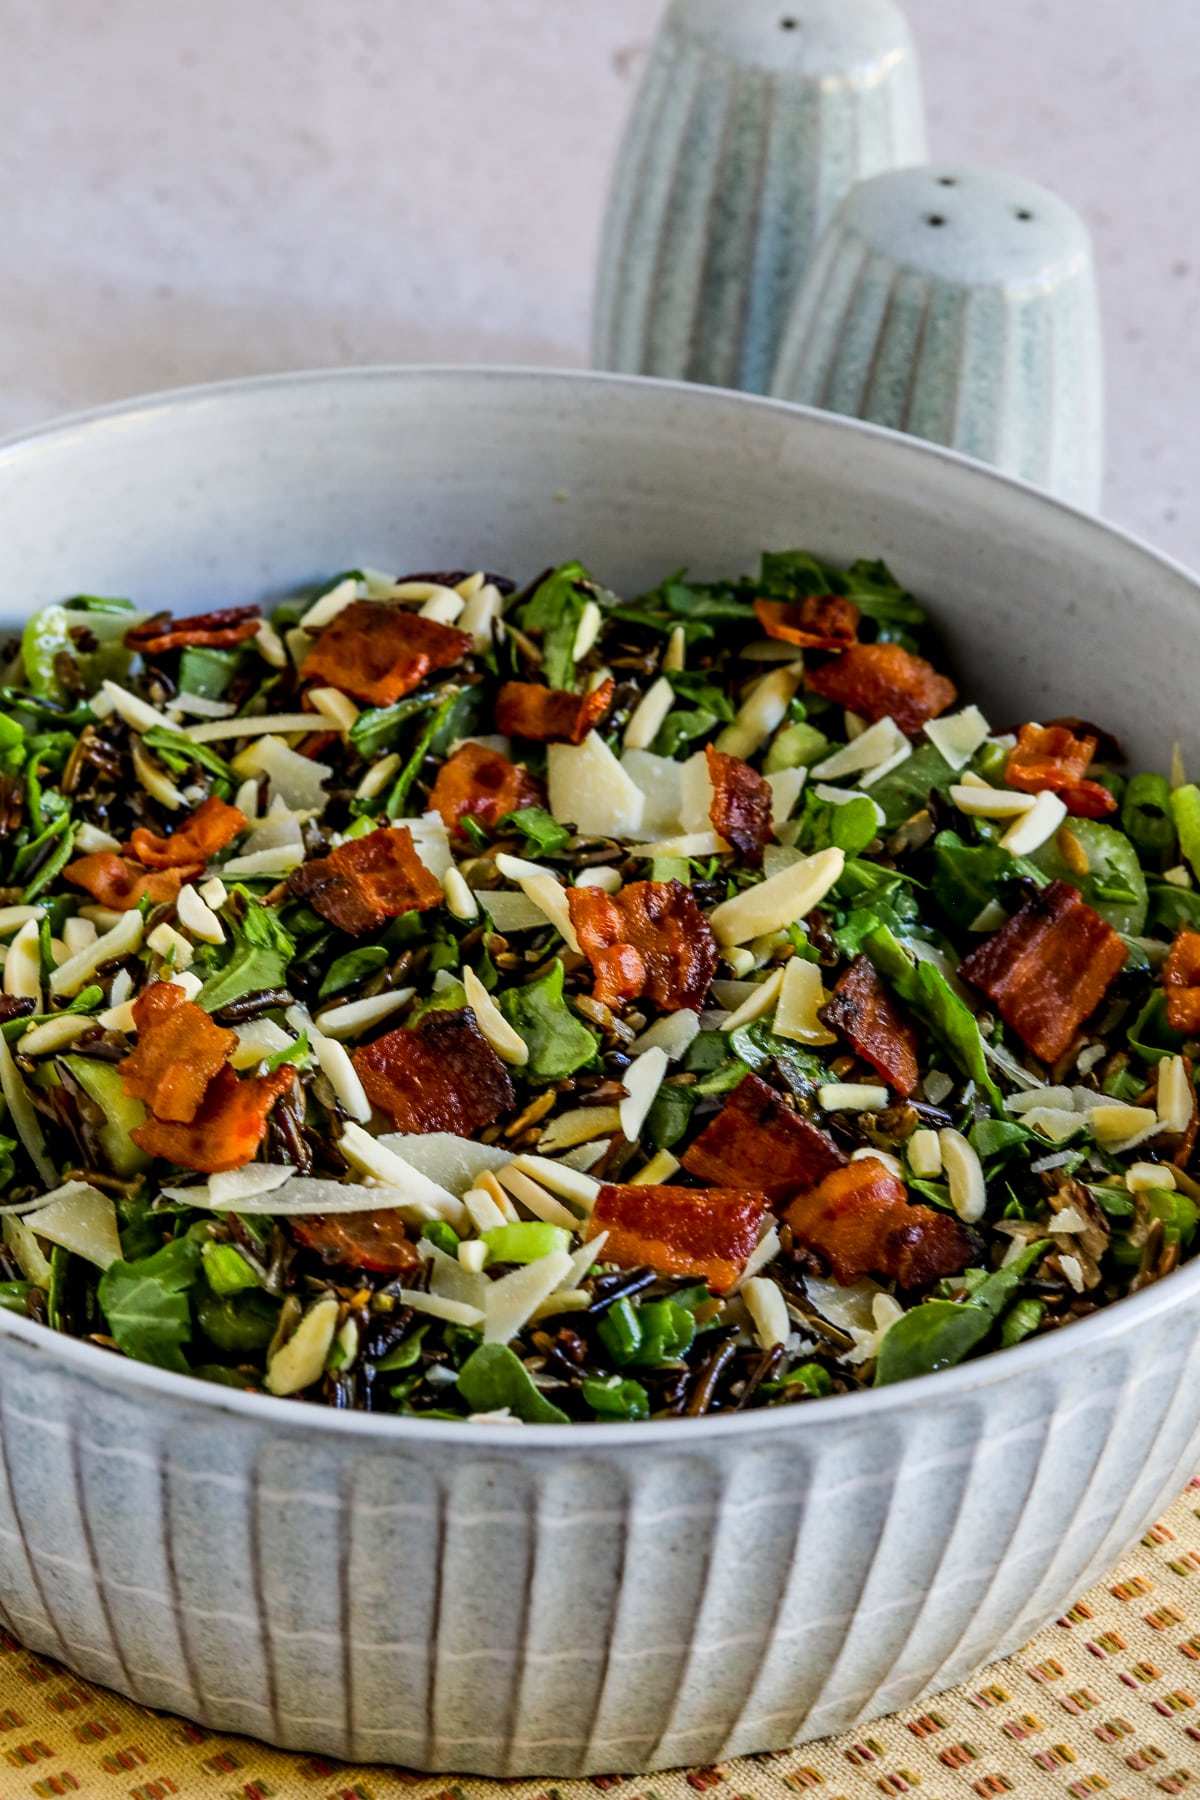 Wild Rice Salad with Bacon and Arugula shown in bowl with salt-pepper in back.